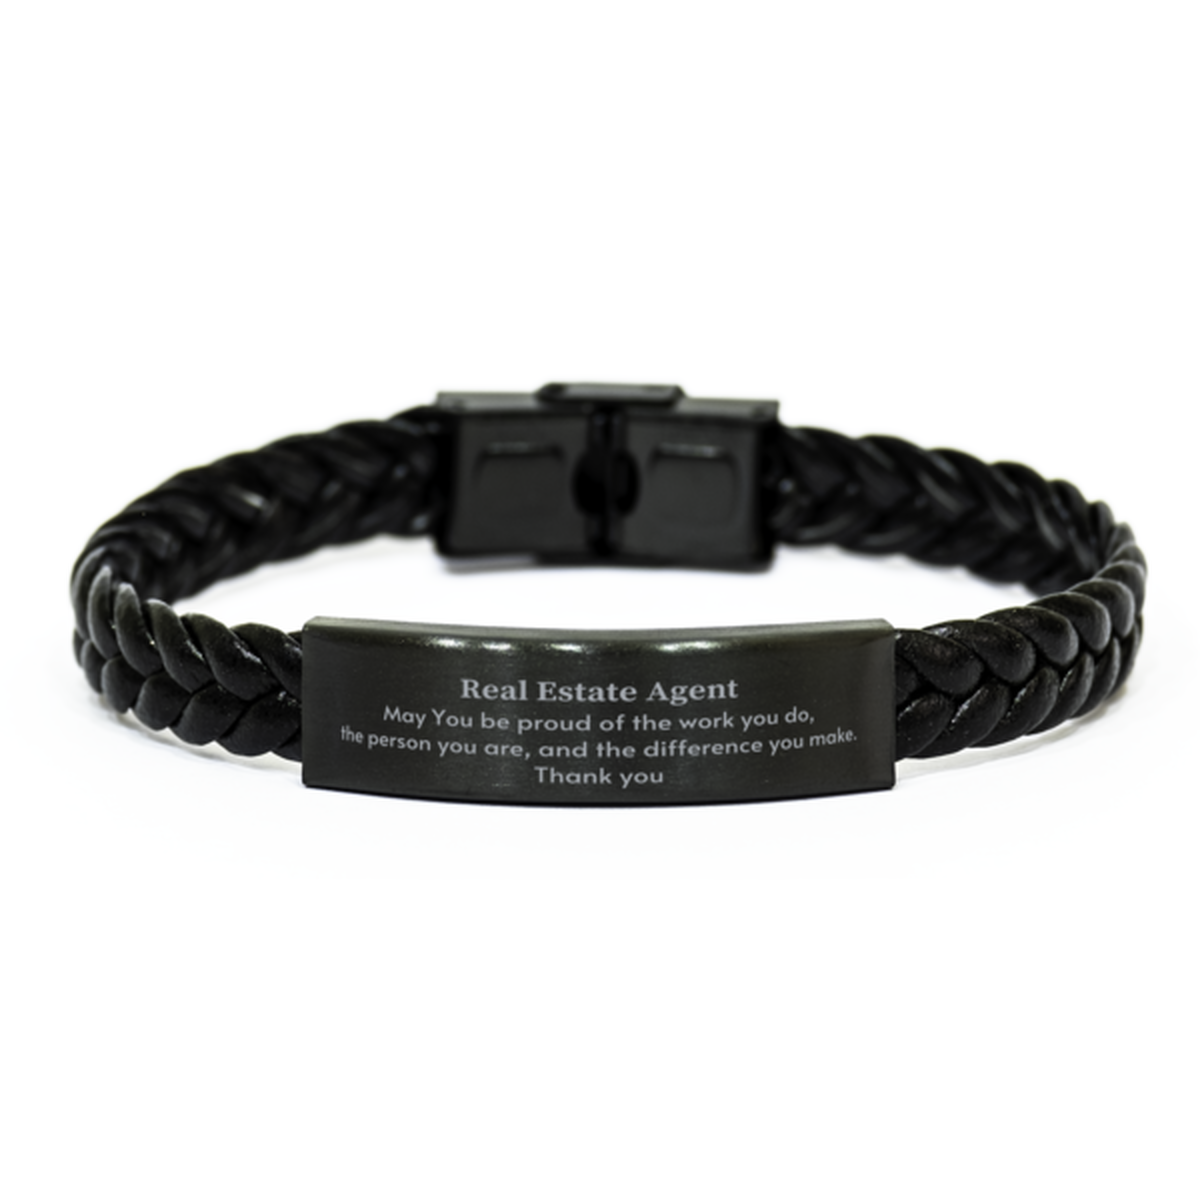 Heartwarming Braided Leather Bracelet Retirement Coworkers Gifts for Real Estate Agent, Real Estate Agent May You be proud of the work you do, the person you are Gifts for Boss Men Women Friends